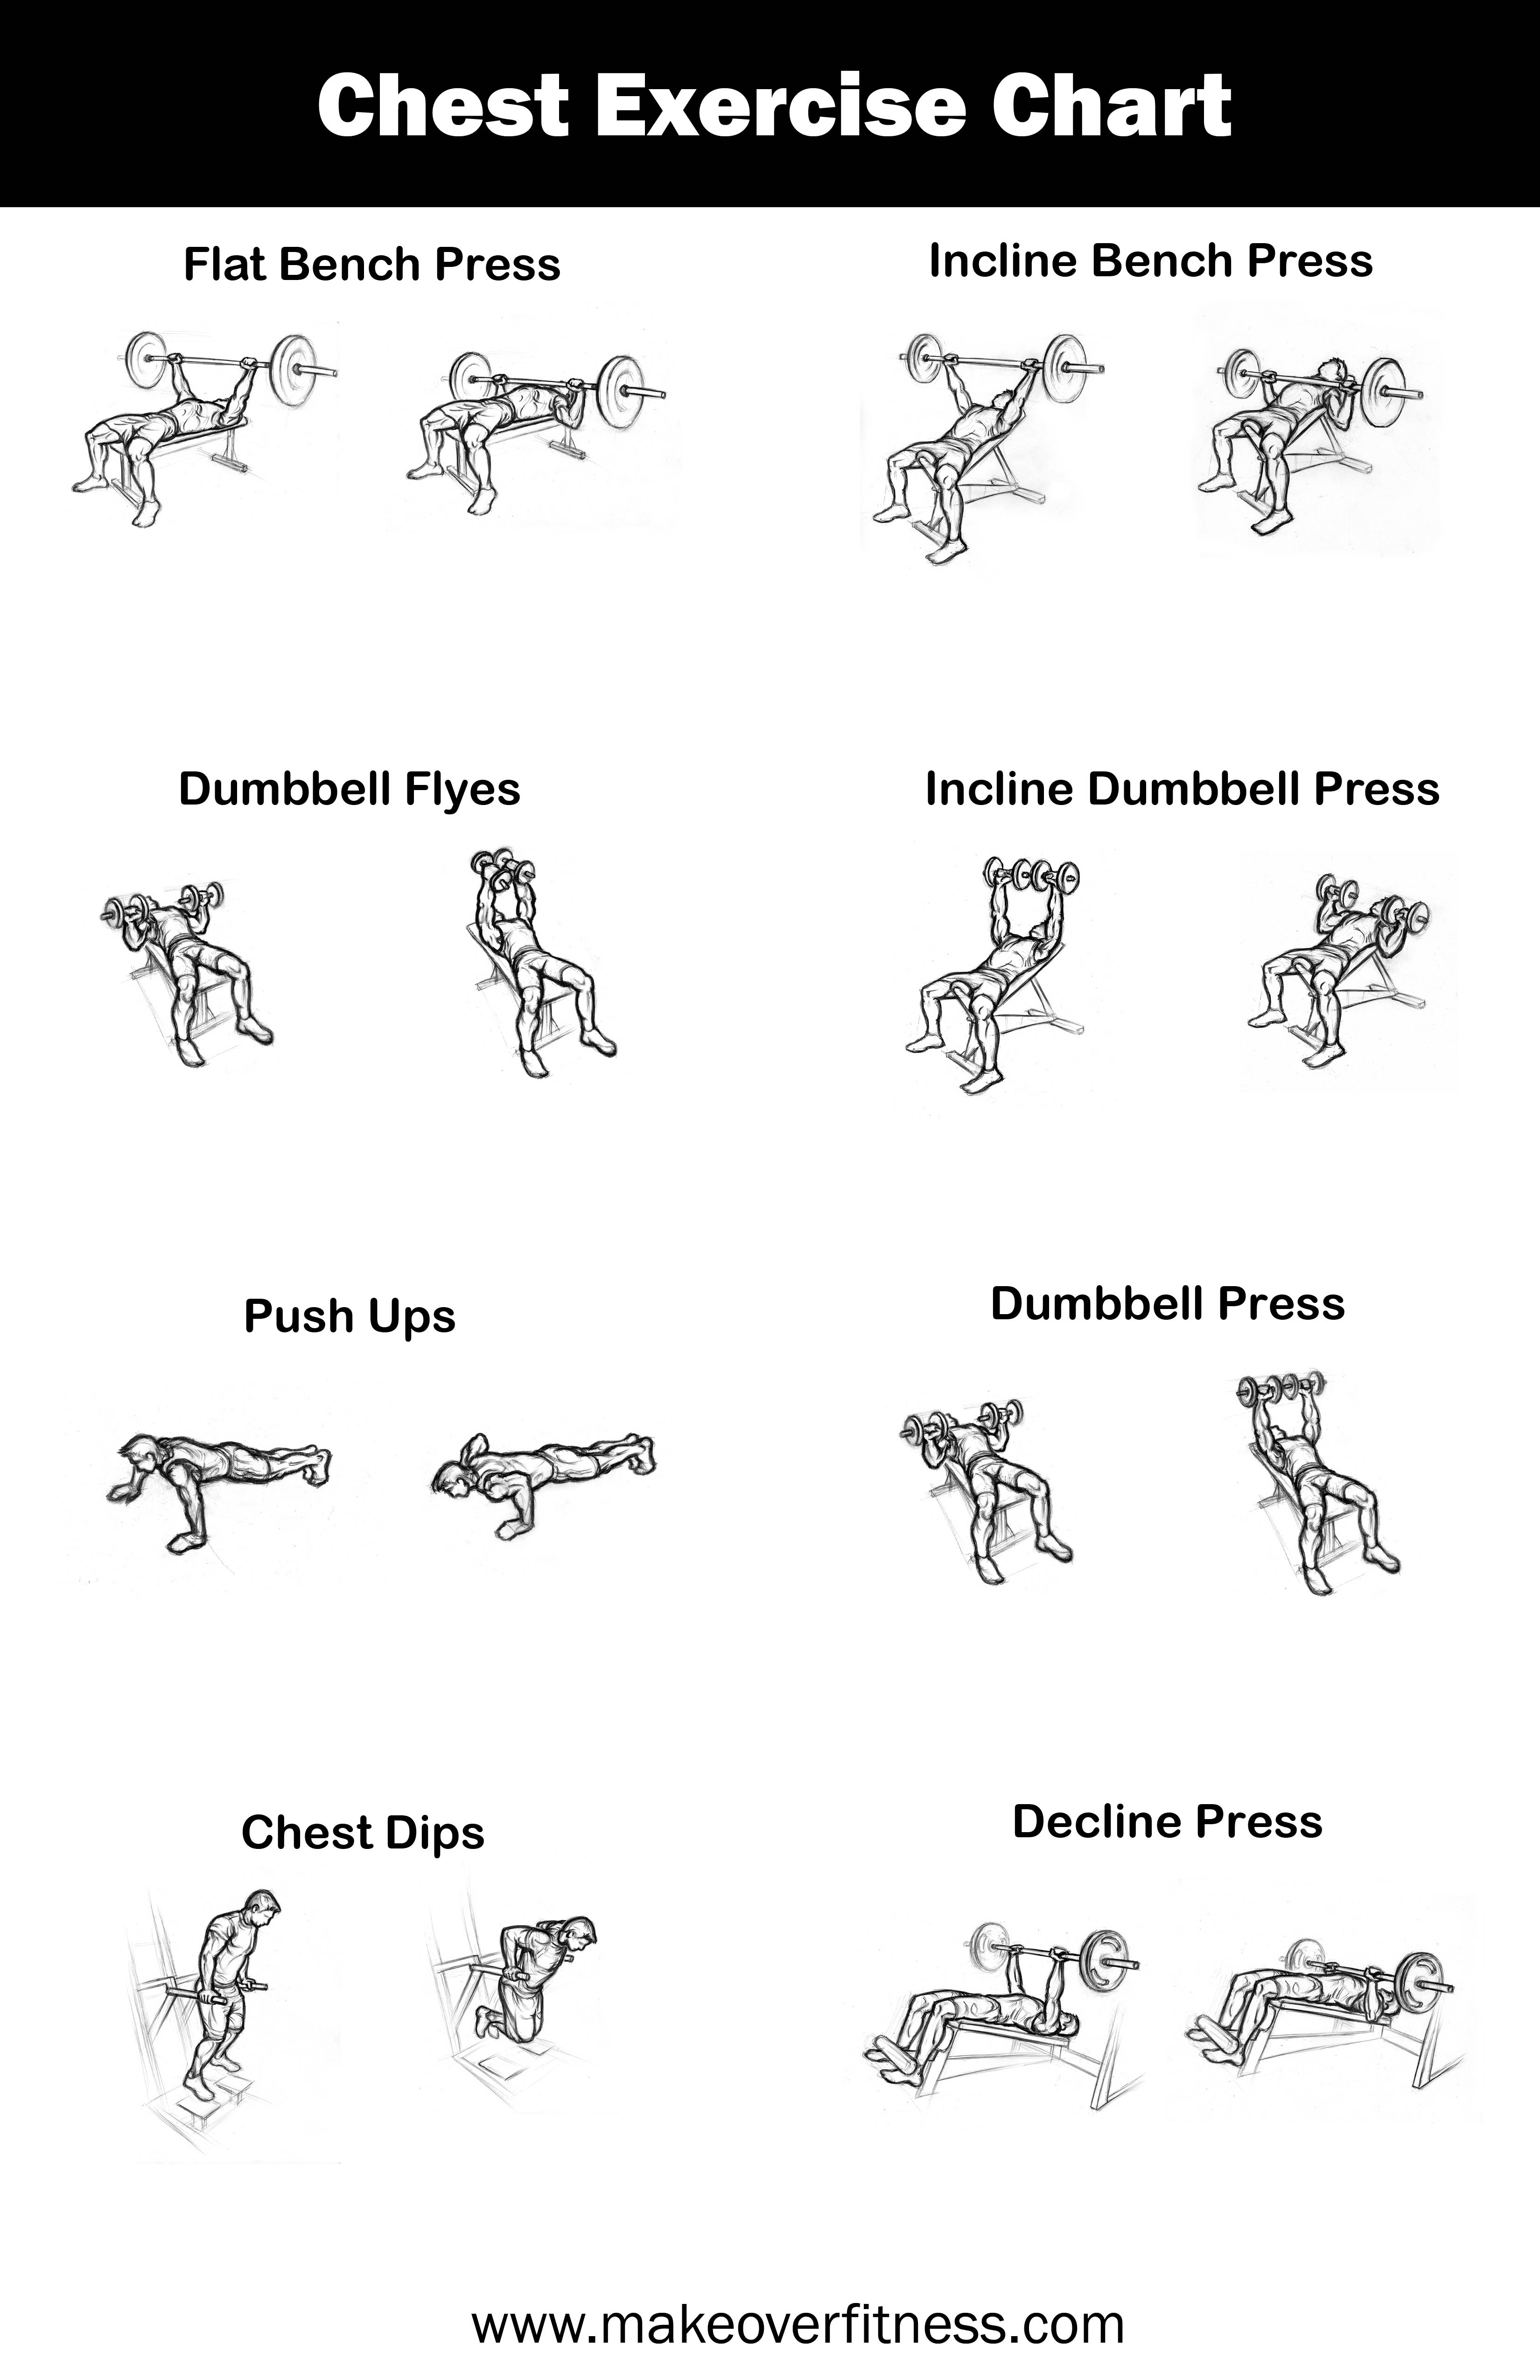 Ultimate Chest Workout Routine: Bench Press, Incline Exercises